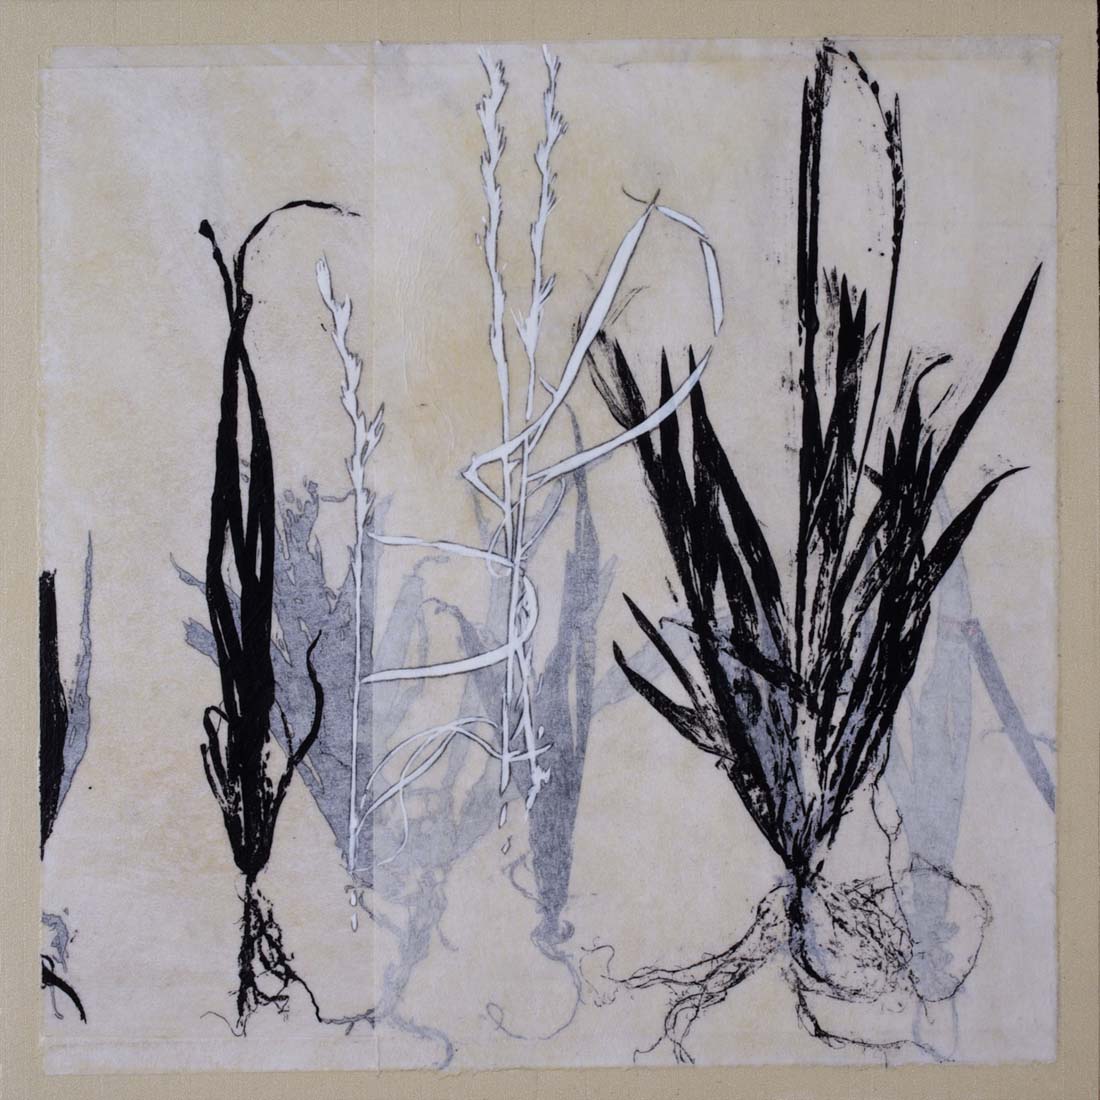 
							

									Karen Kitchel									One Month in June, #19 2009									mixed media on wood panel<br />
12 x 12 inches									


							